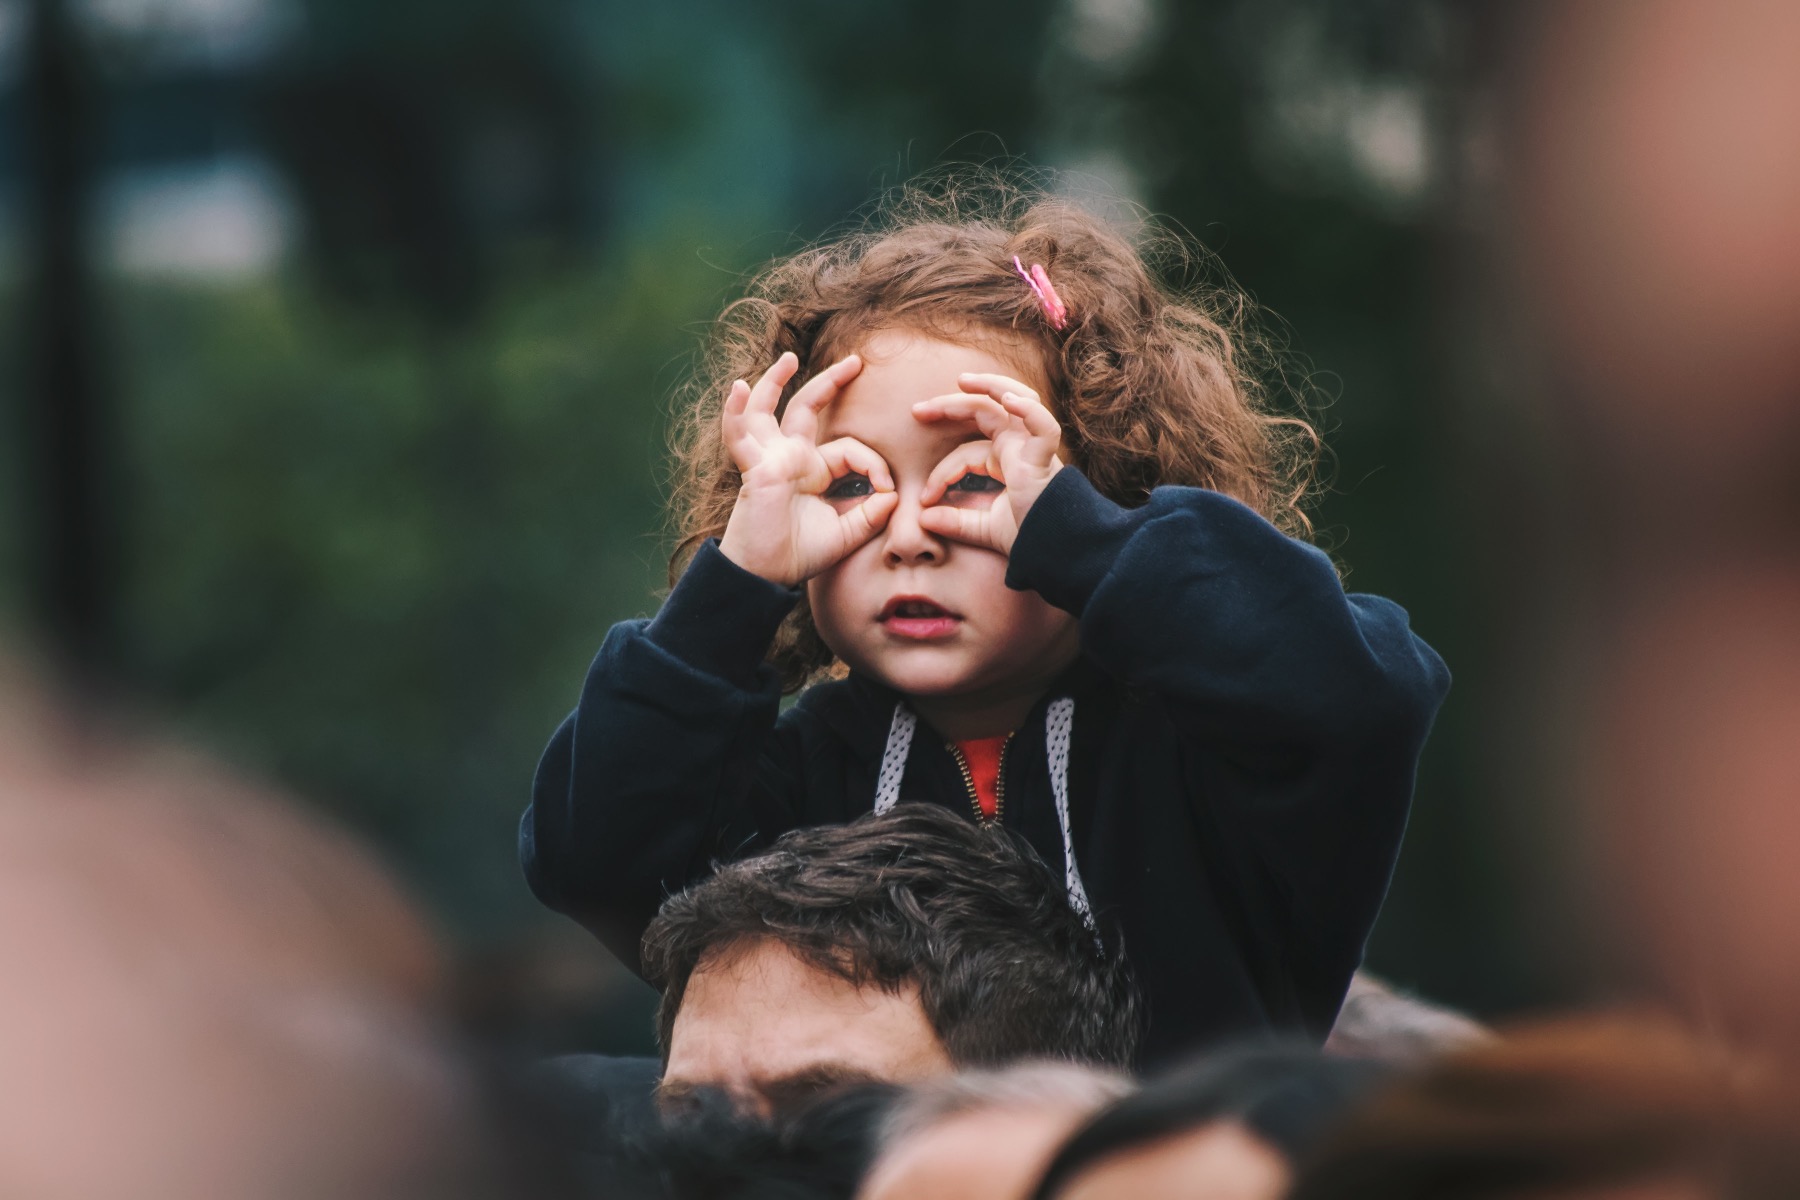 Preschool girl sitting on her dad's shoulders and making glasses with her fingers while watching a concert